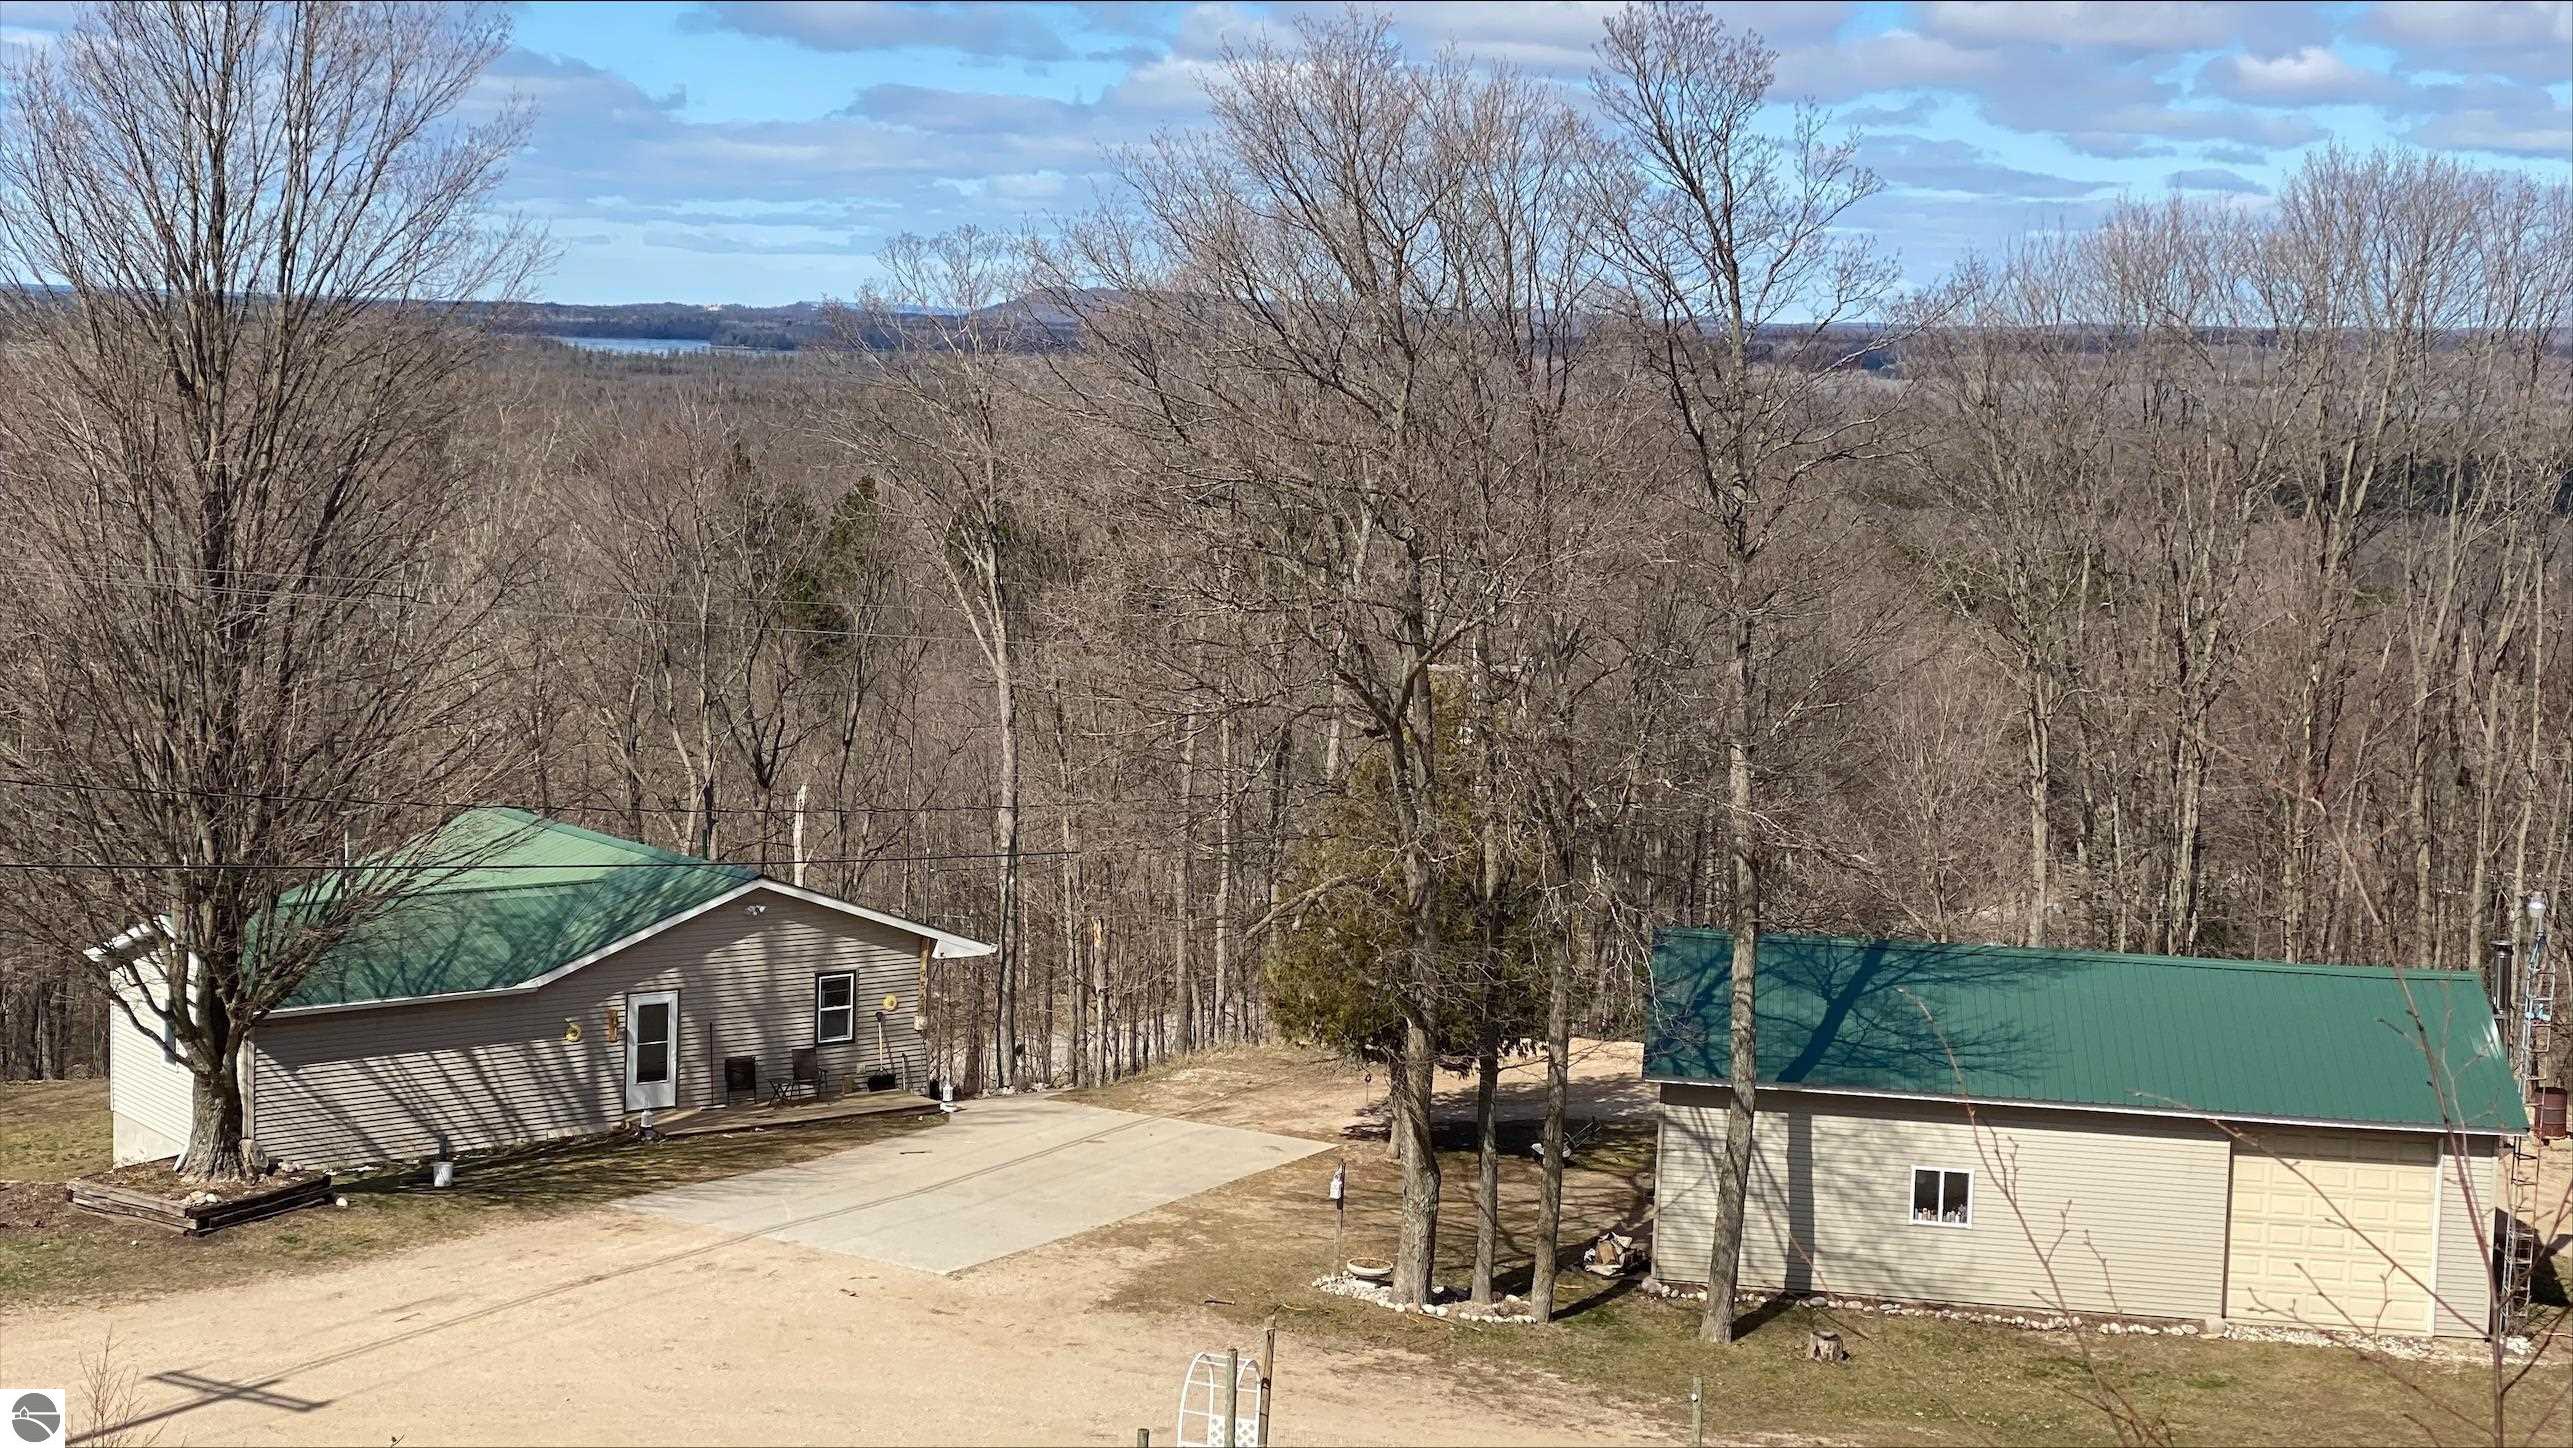 Beulah home and separate pole building are pictured from above with mature trees and distant views.